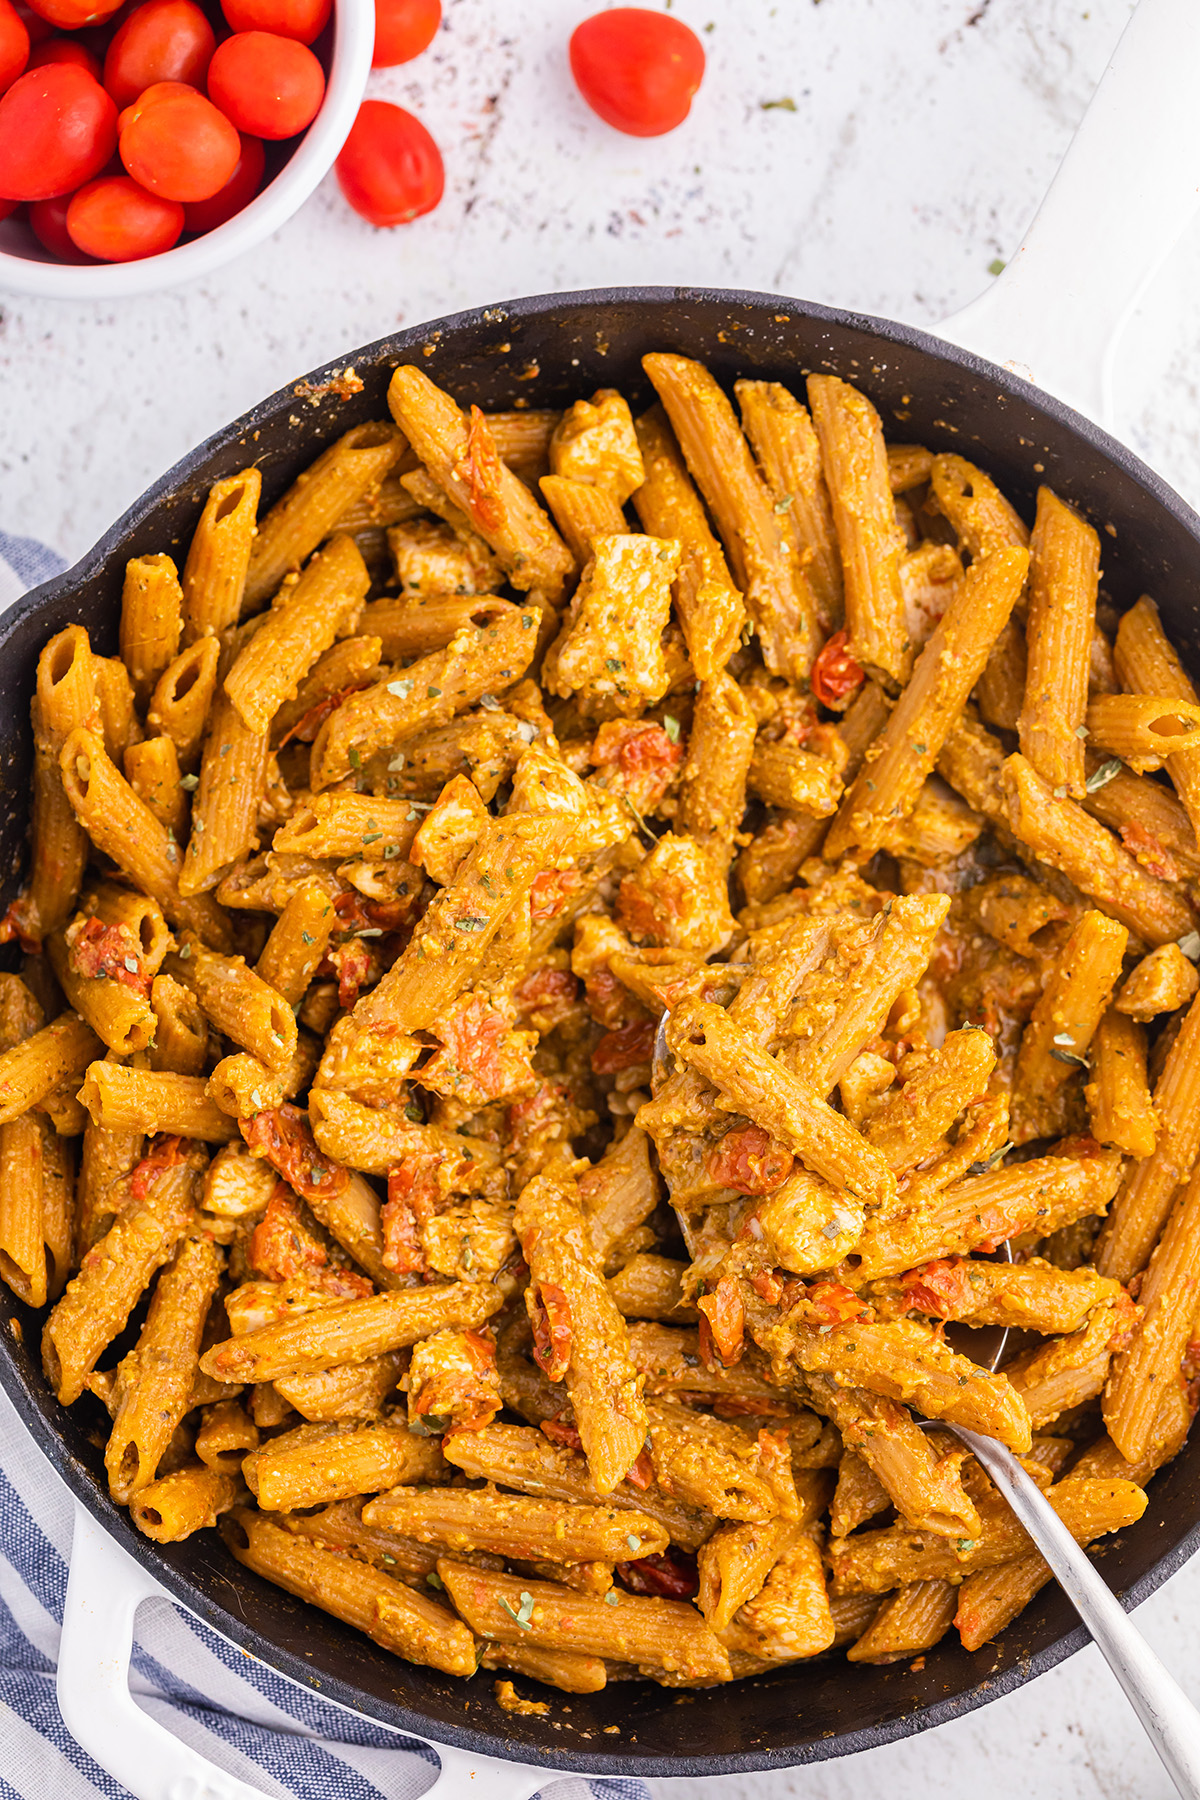 Pesto Penne with Chicken and Cherry Tomatoes